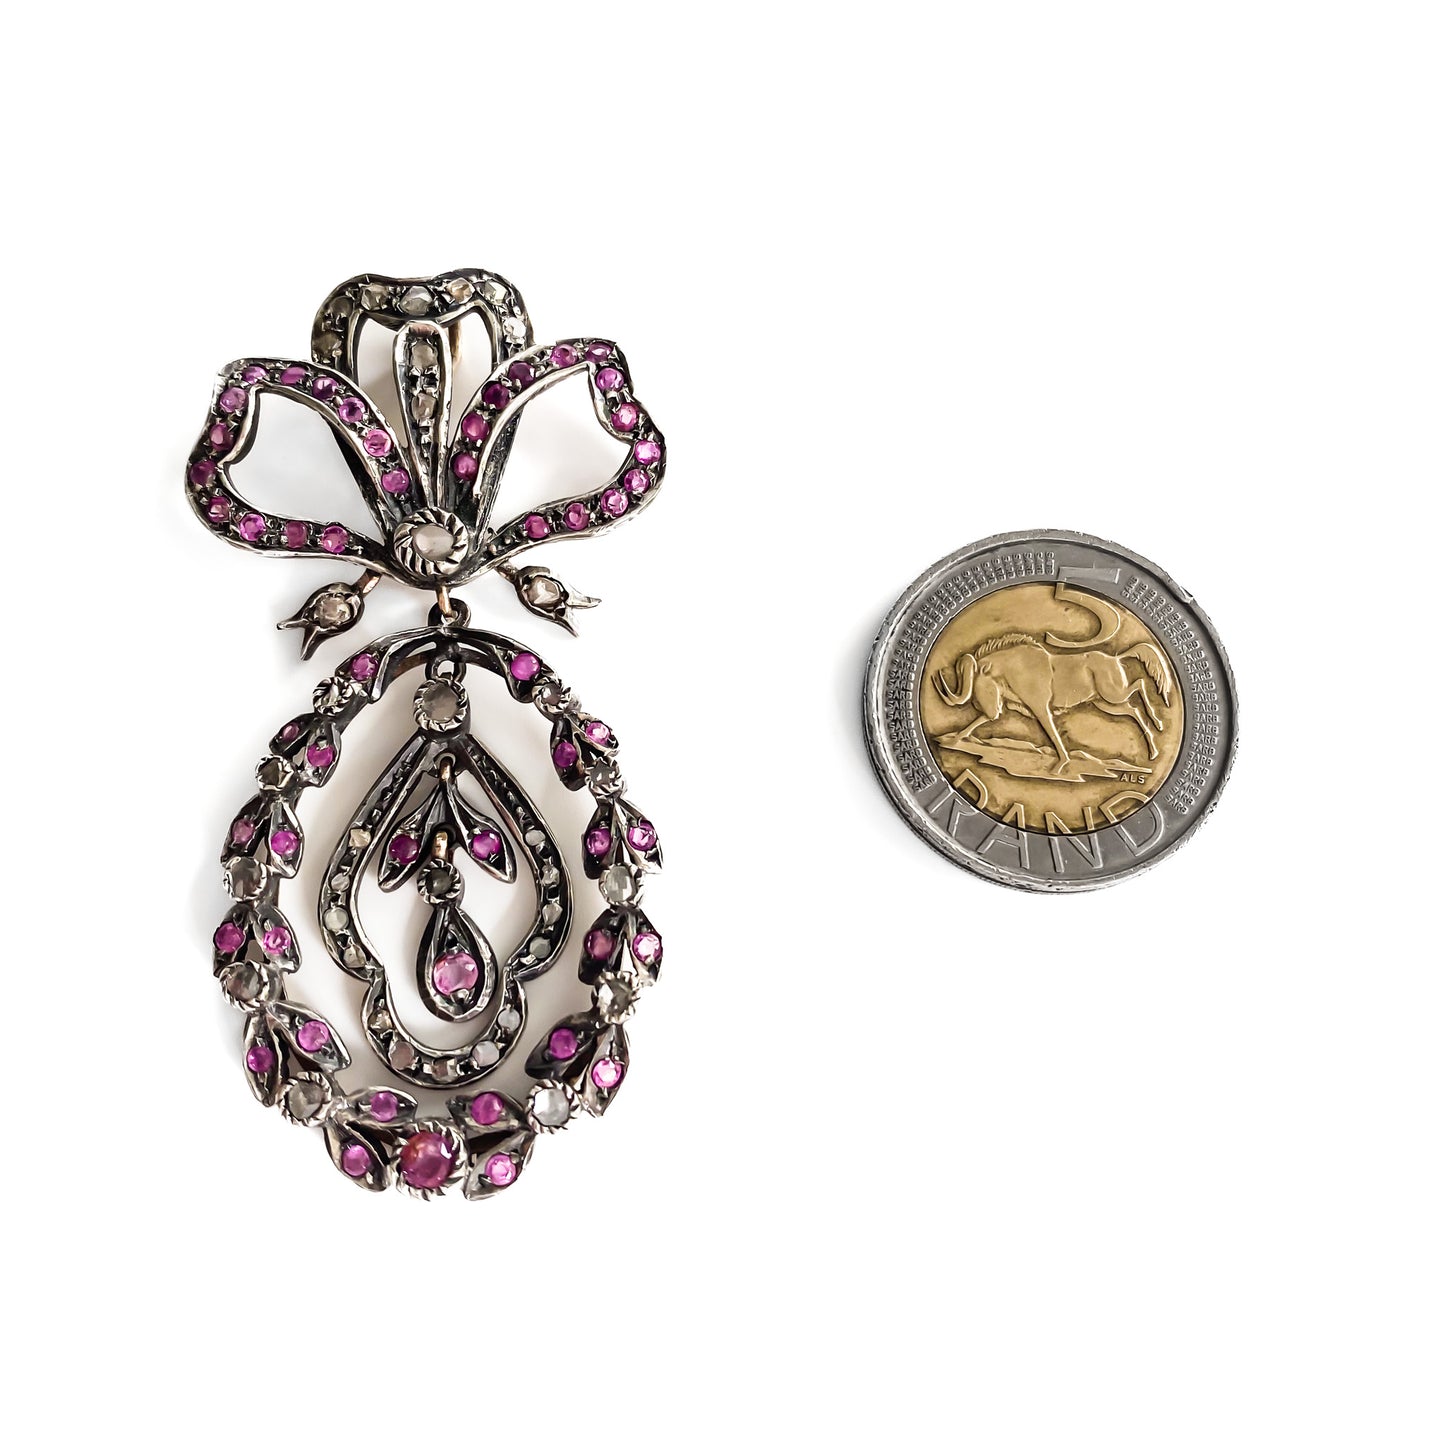 Magnificent Victorian 15ct gold and silver pendant set with fifty-two faceted rubies and thirty-seven mine cut diamonds.